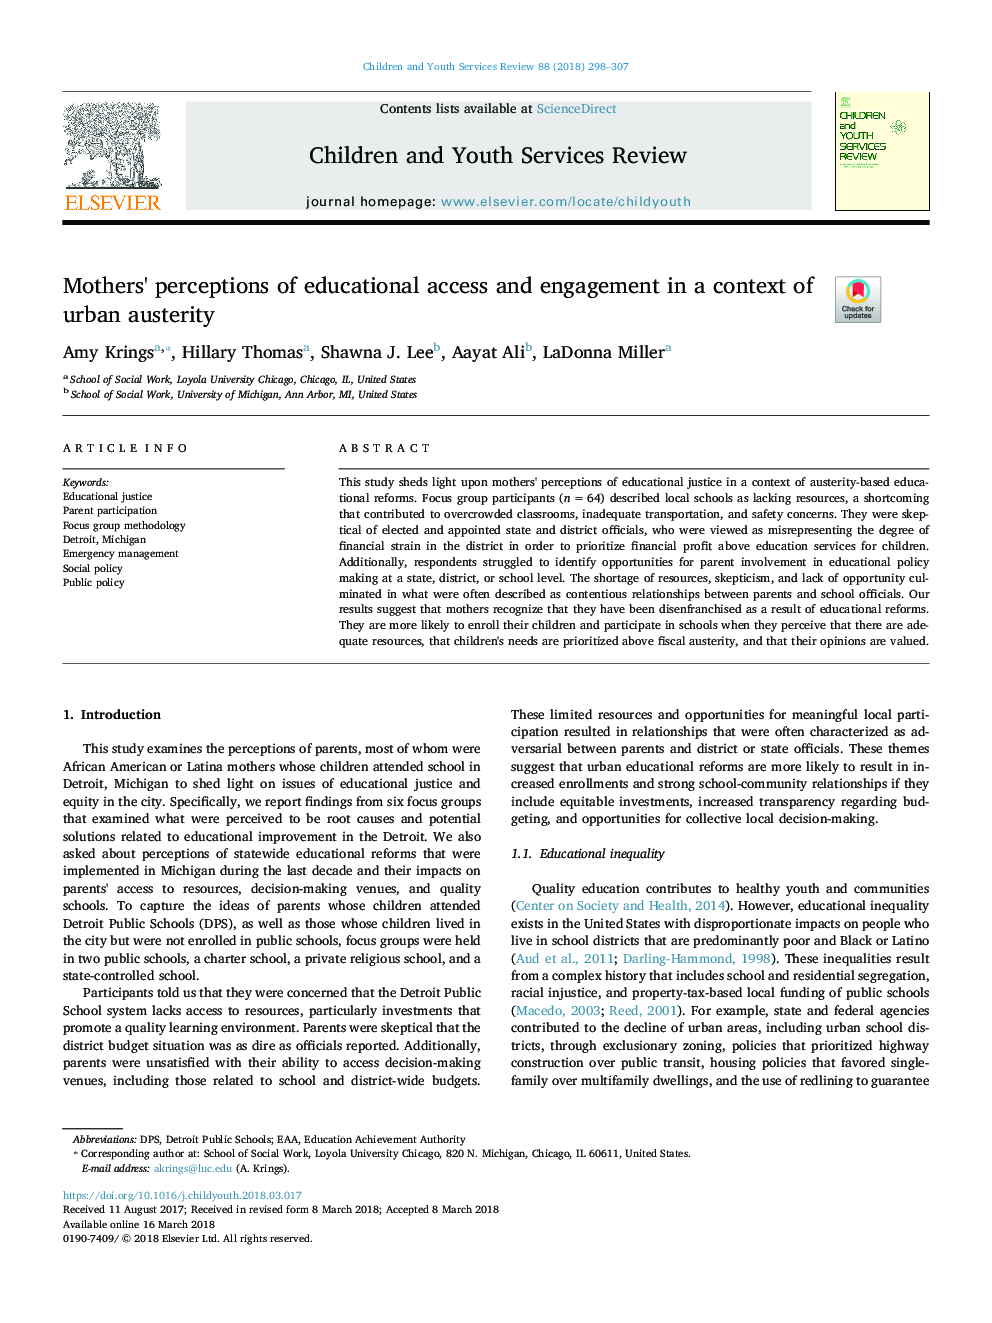 Mothers' perceptions of educational access and engagement in a context of urban austerity